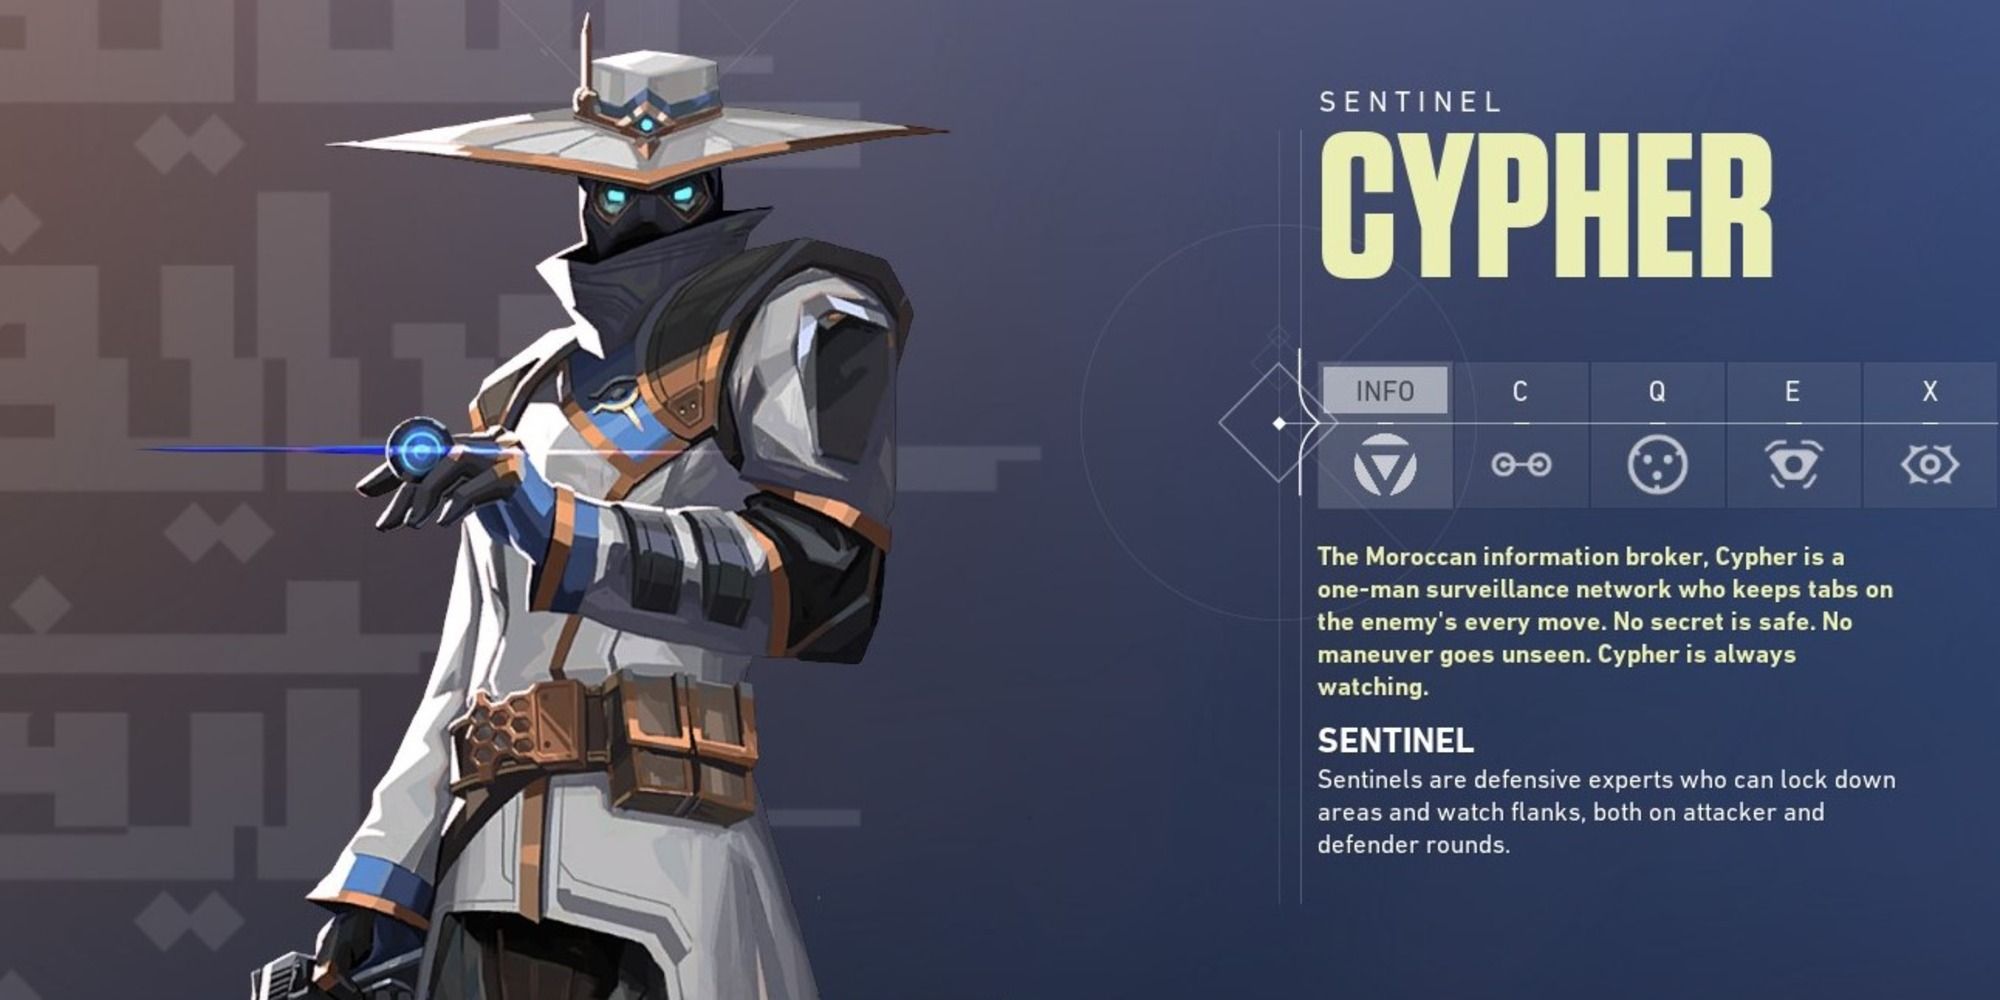 Image of Valorant's Cypher agent